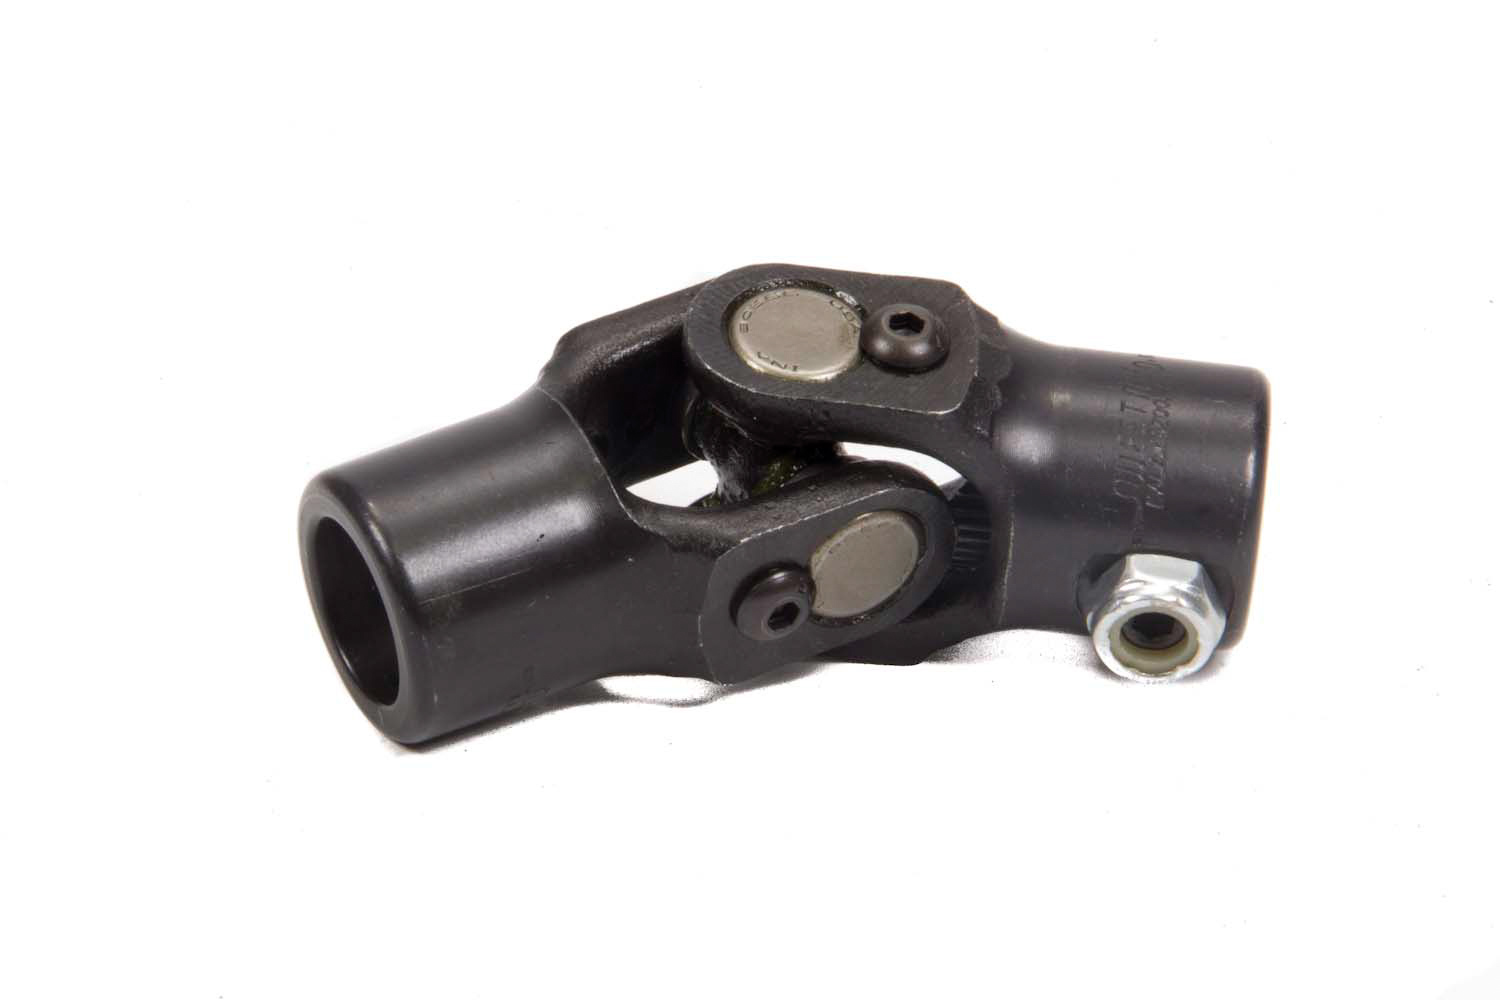 Sweet Manufacturing 401-51319 Steering Universal Joint, Single Joint, 9/16 in 26 Spline to 3/4 in Double D, Steel, Black Paint, Each